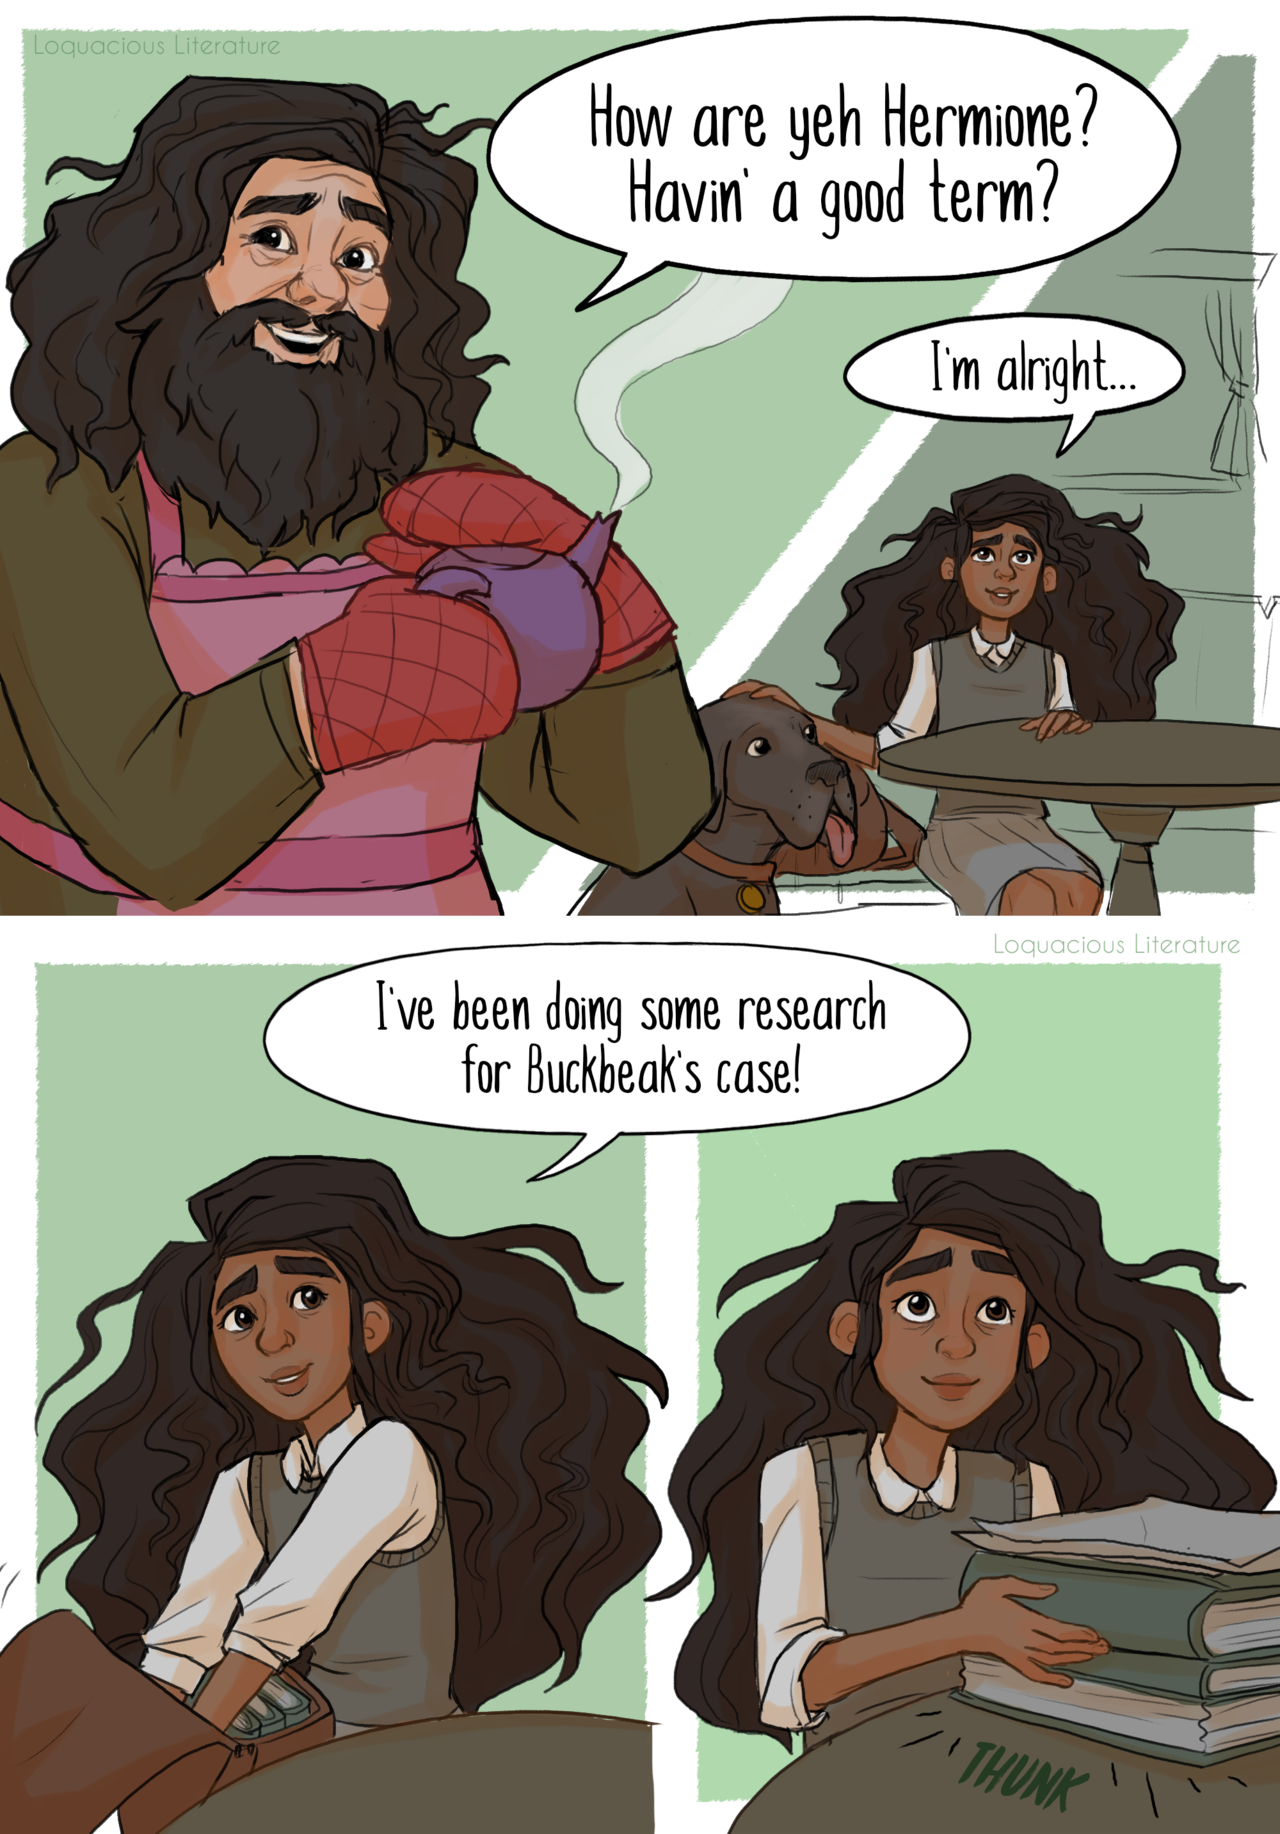 Hermione falls in love with a dementor comic